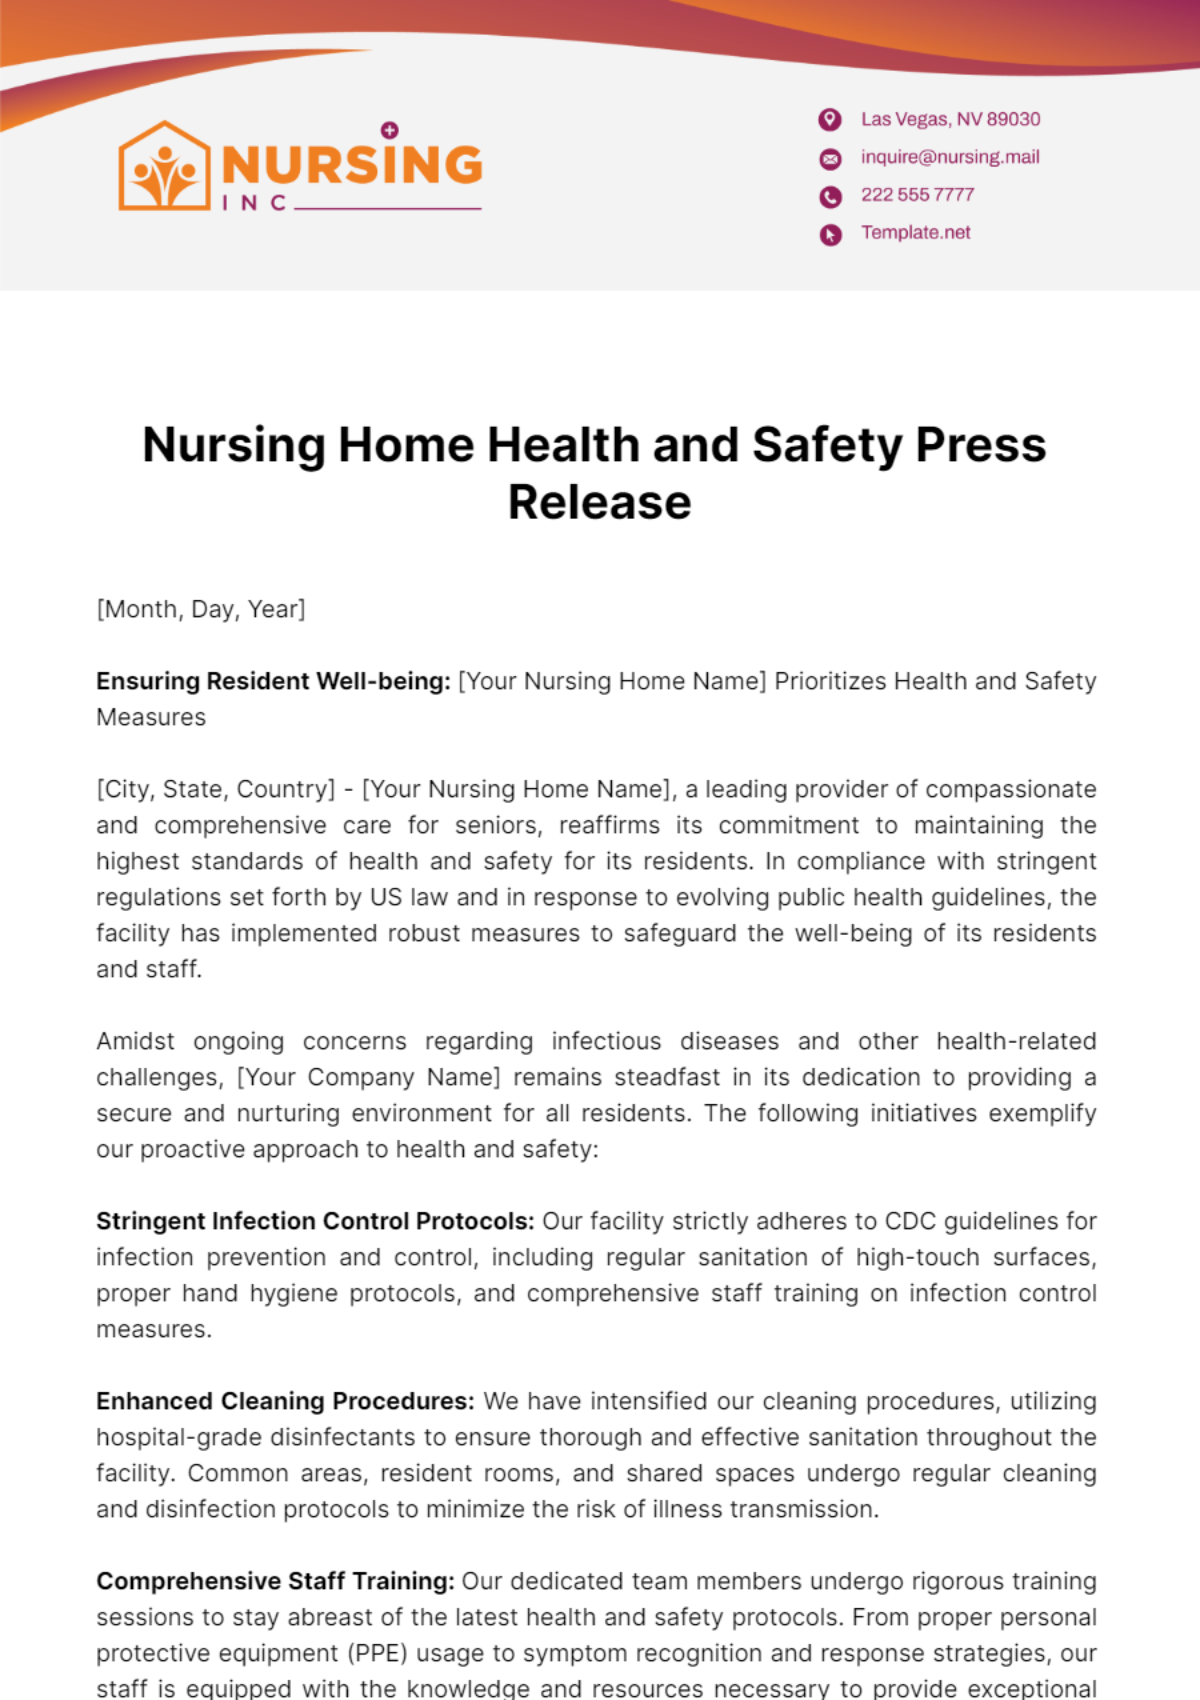 Nursing Home Health and Safety Press Release Template